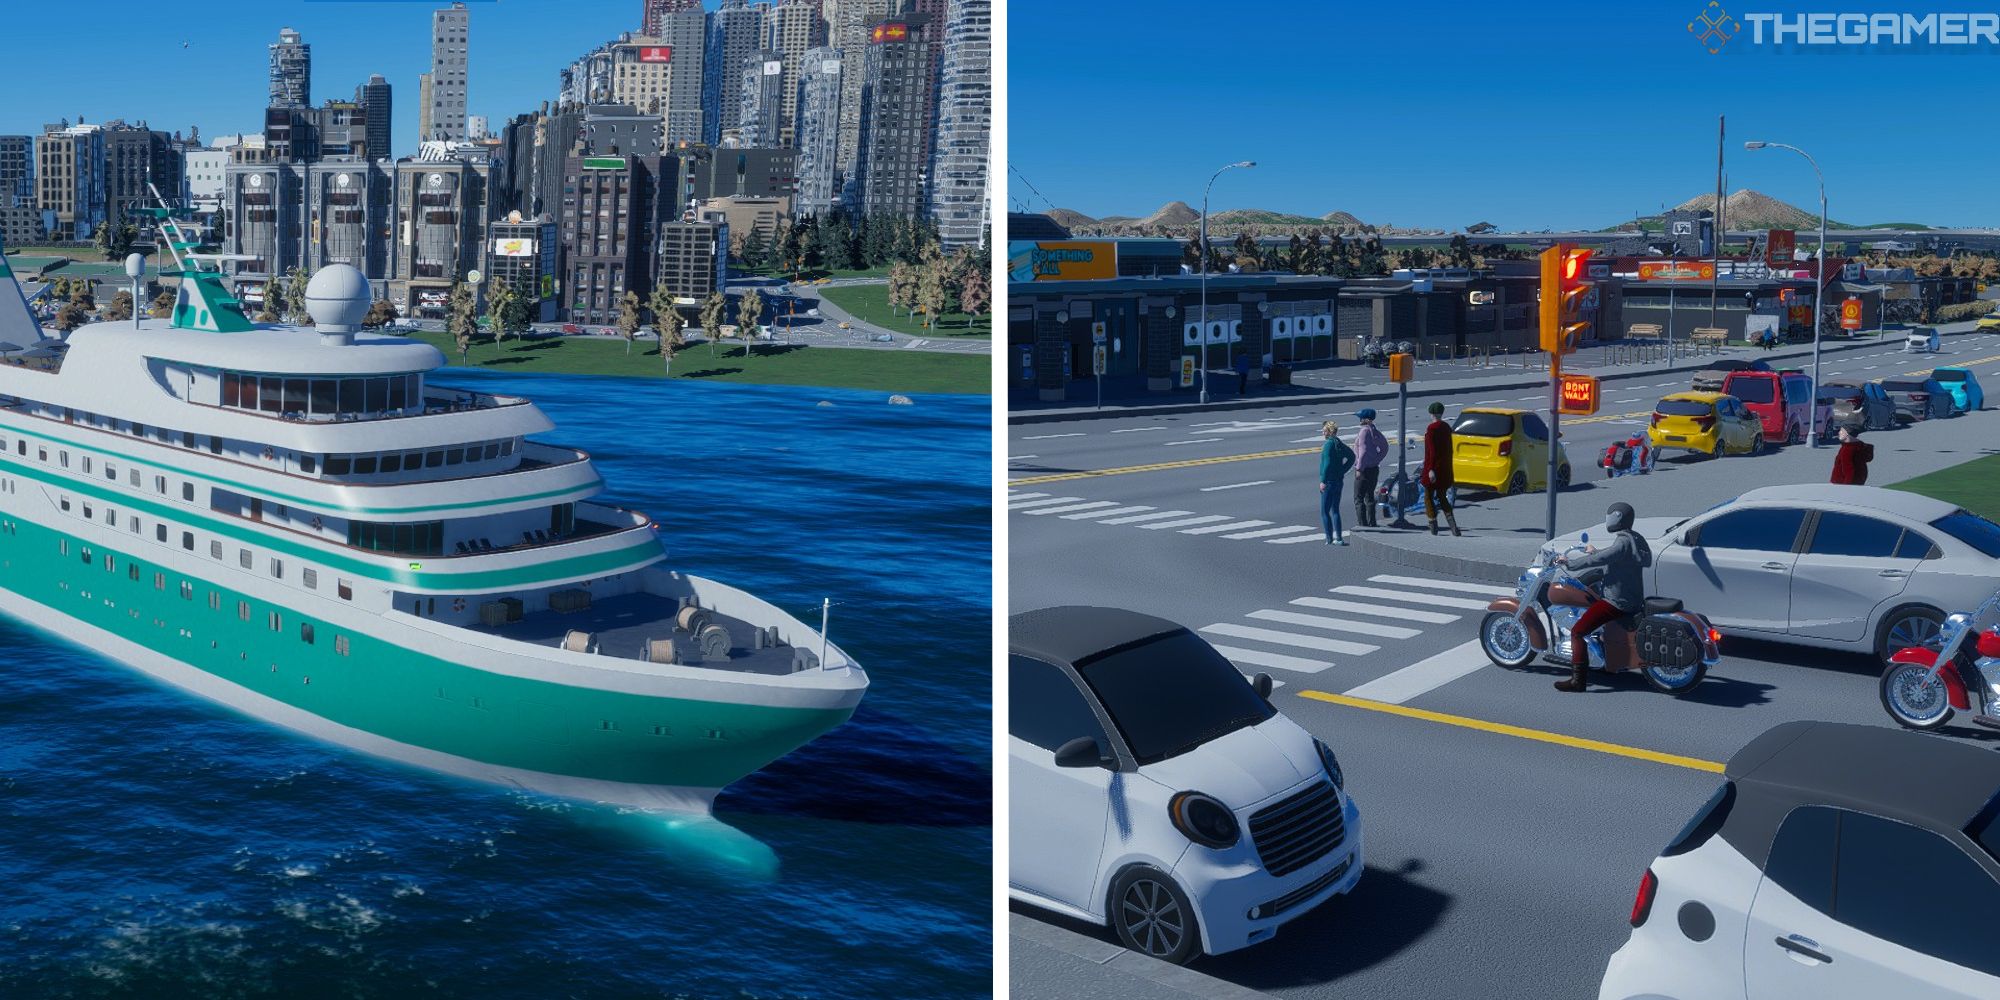 cities skyliens 2 split iamge showing boat in water next to image of traffic at an intersection